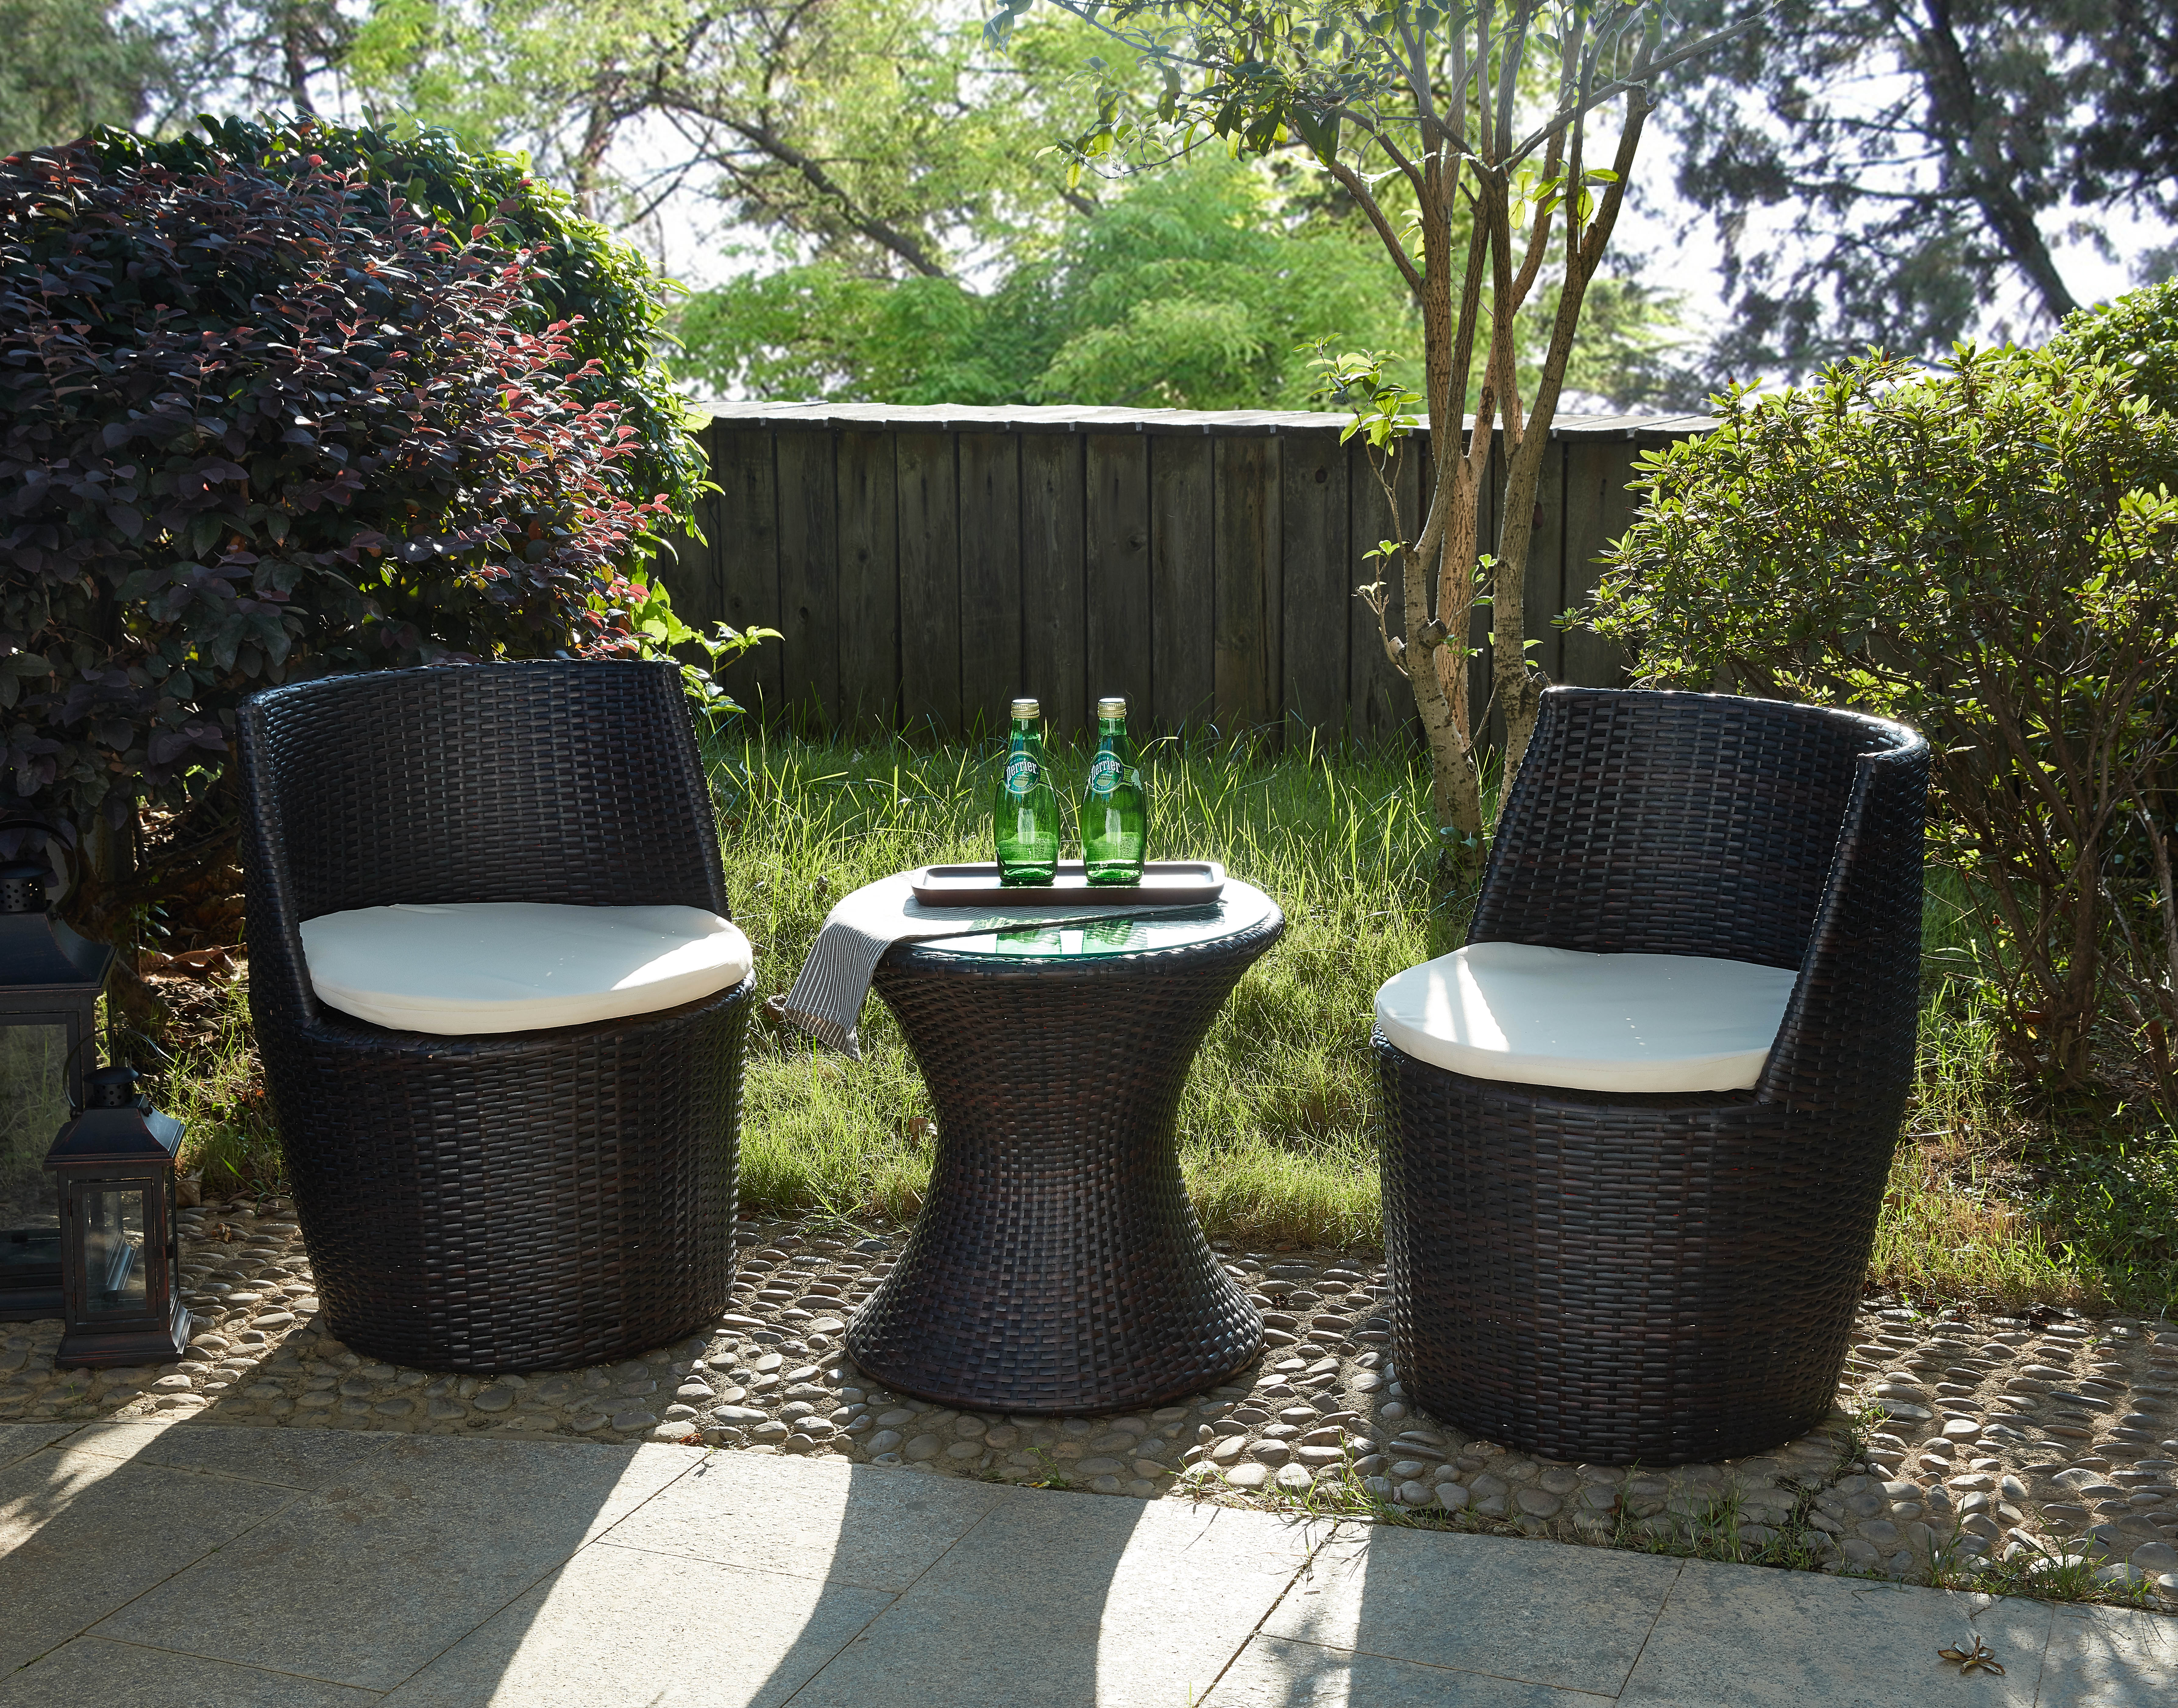 Details About Verona 3 Pc Rattan Garden Patio Furniture Vase Set Table 2 Chairs Stackable with proportions 7147 X 5605